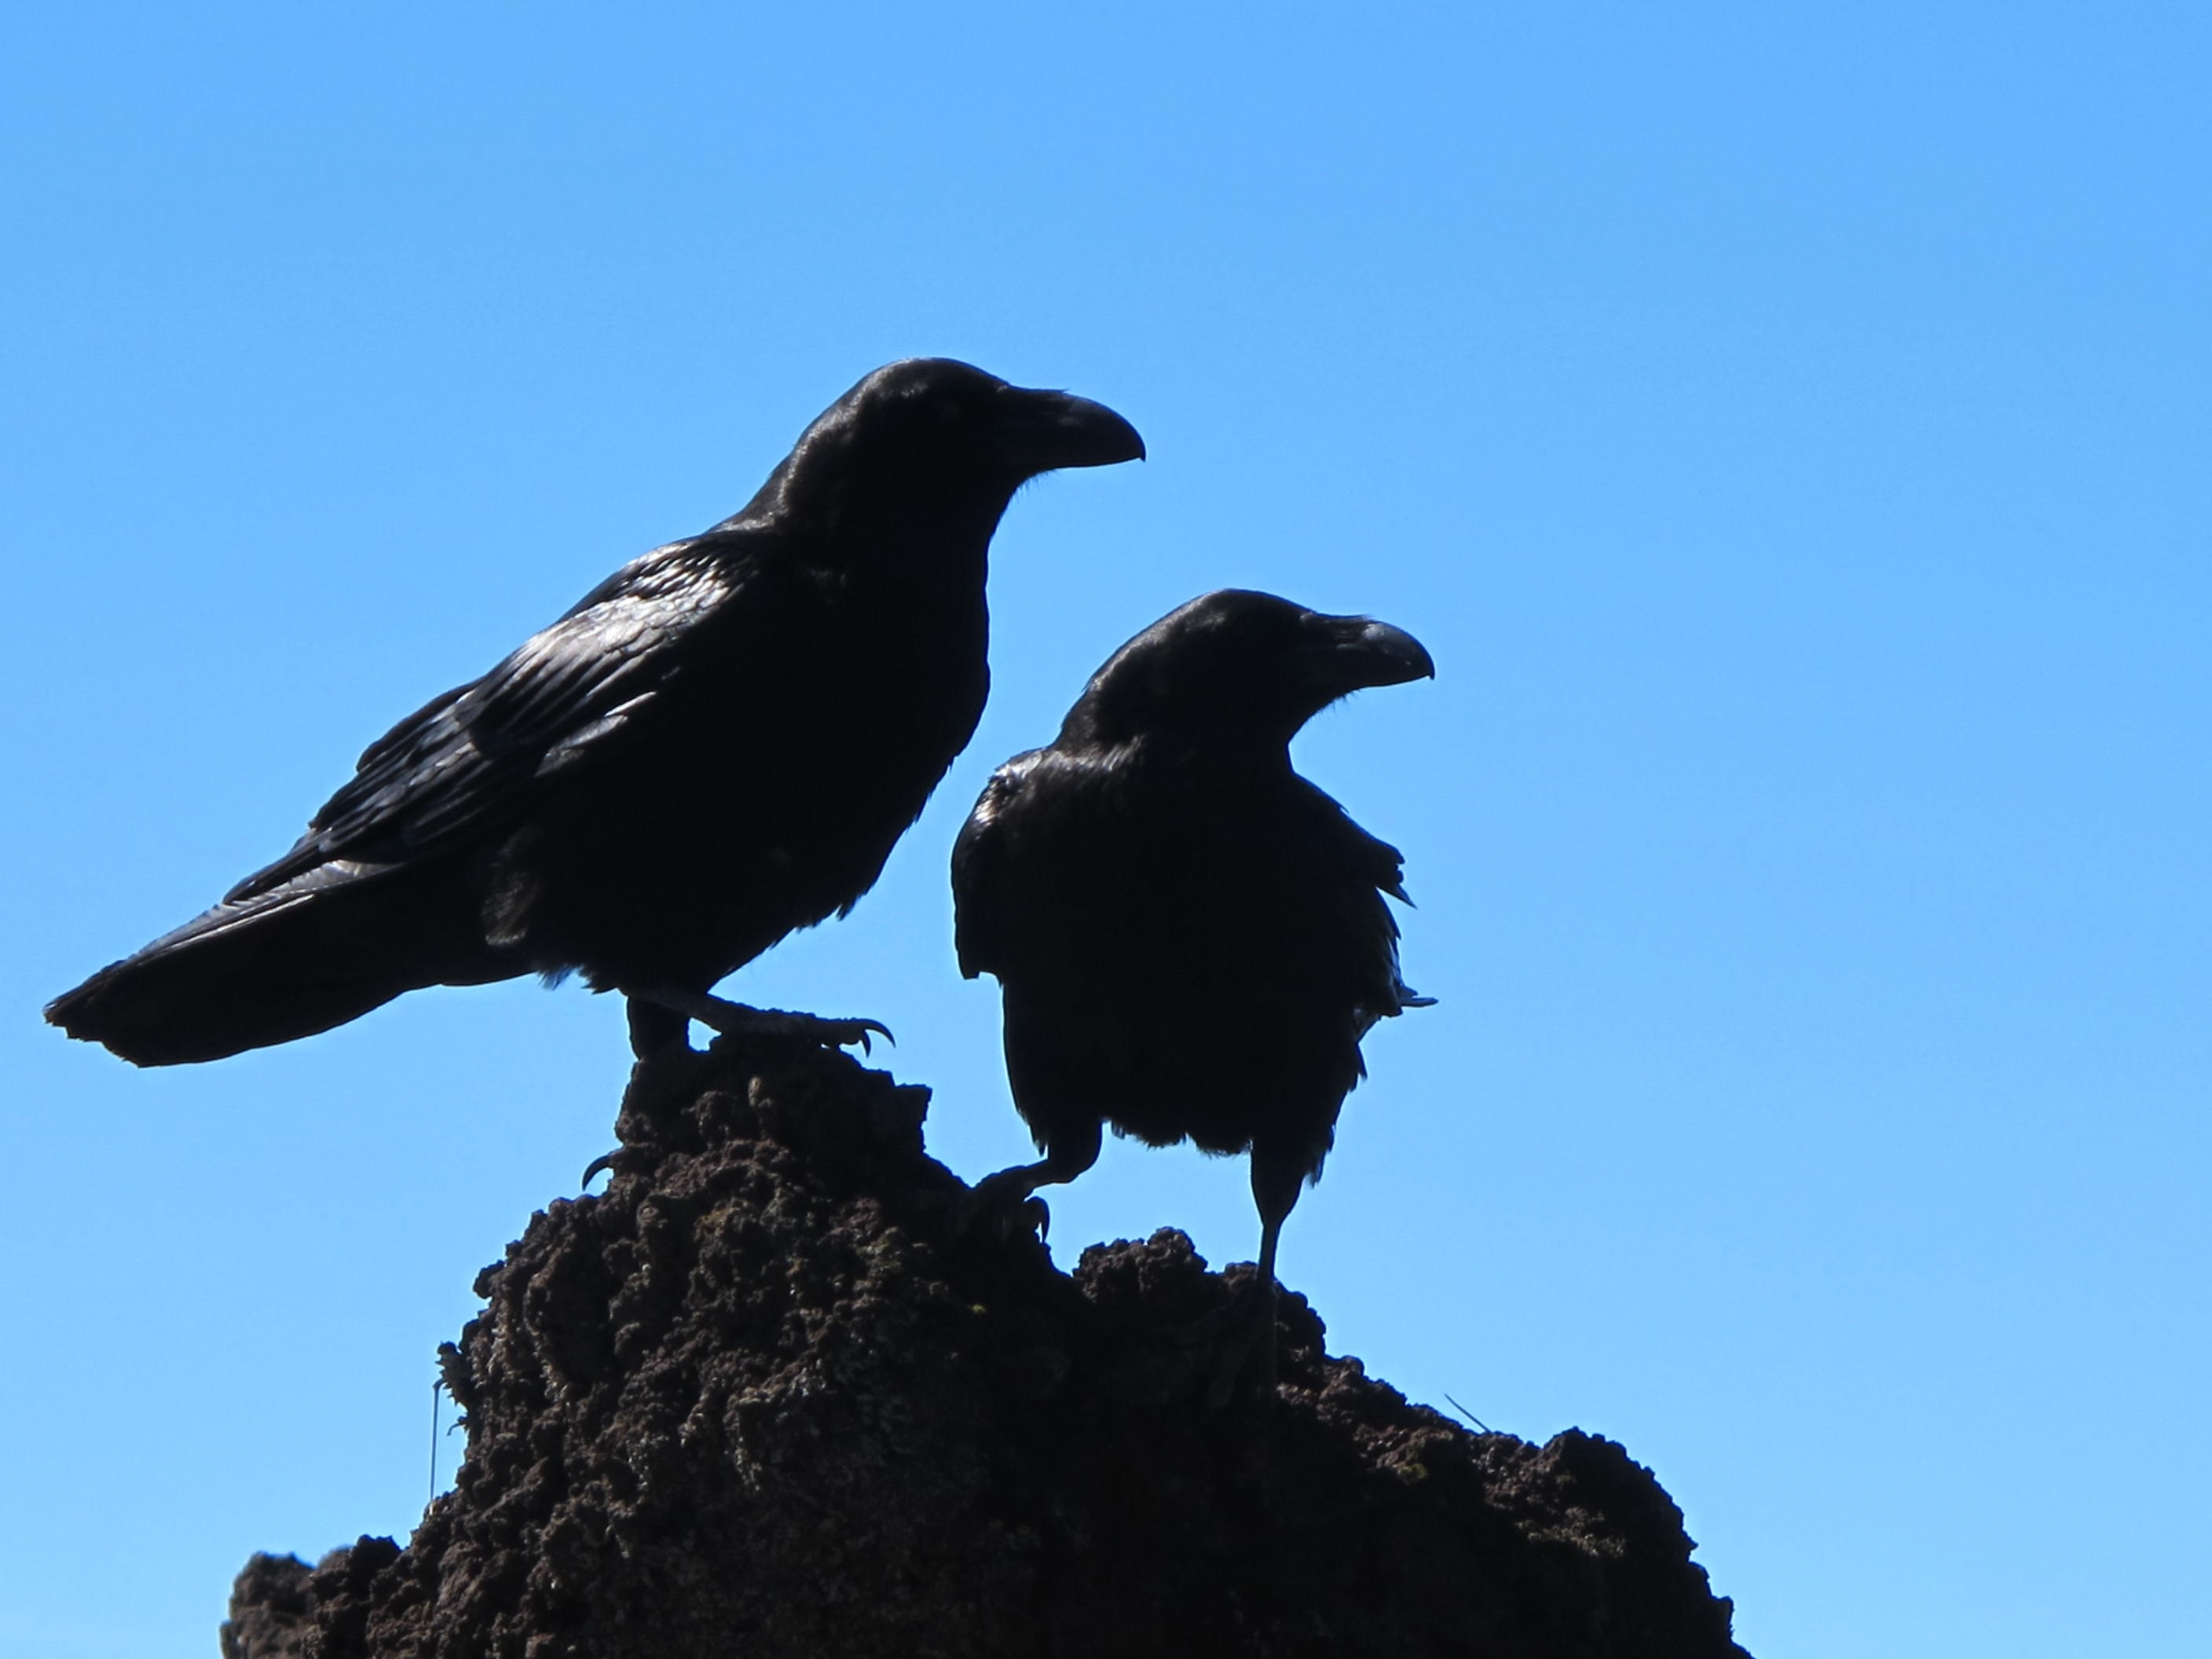 2 crows